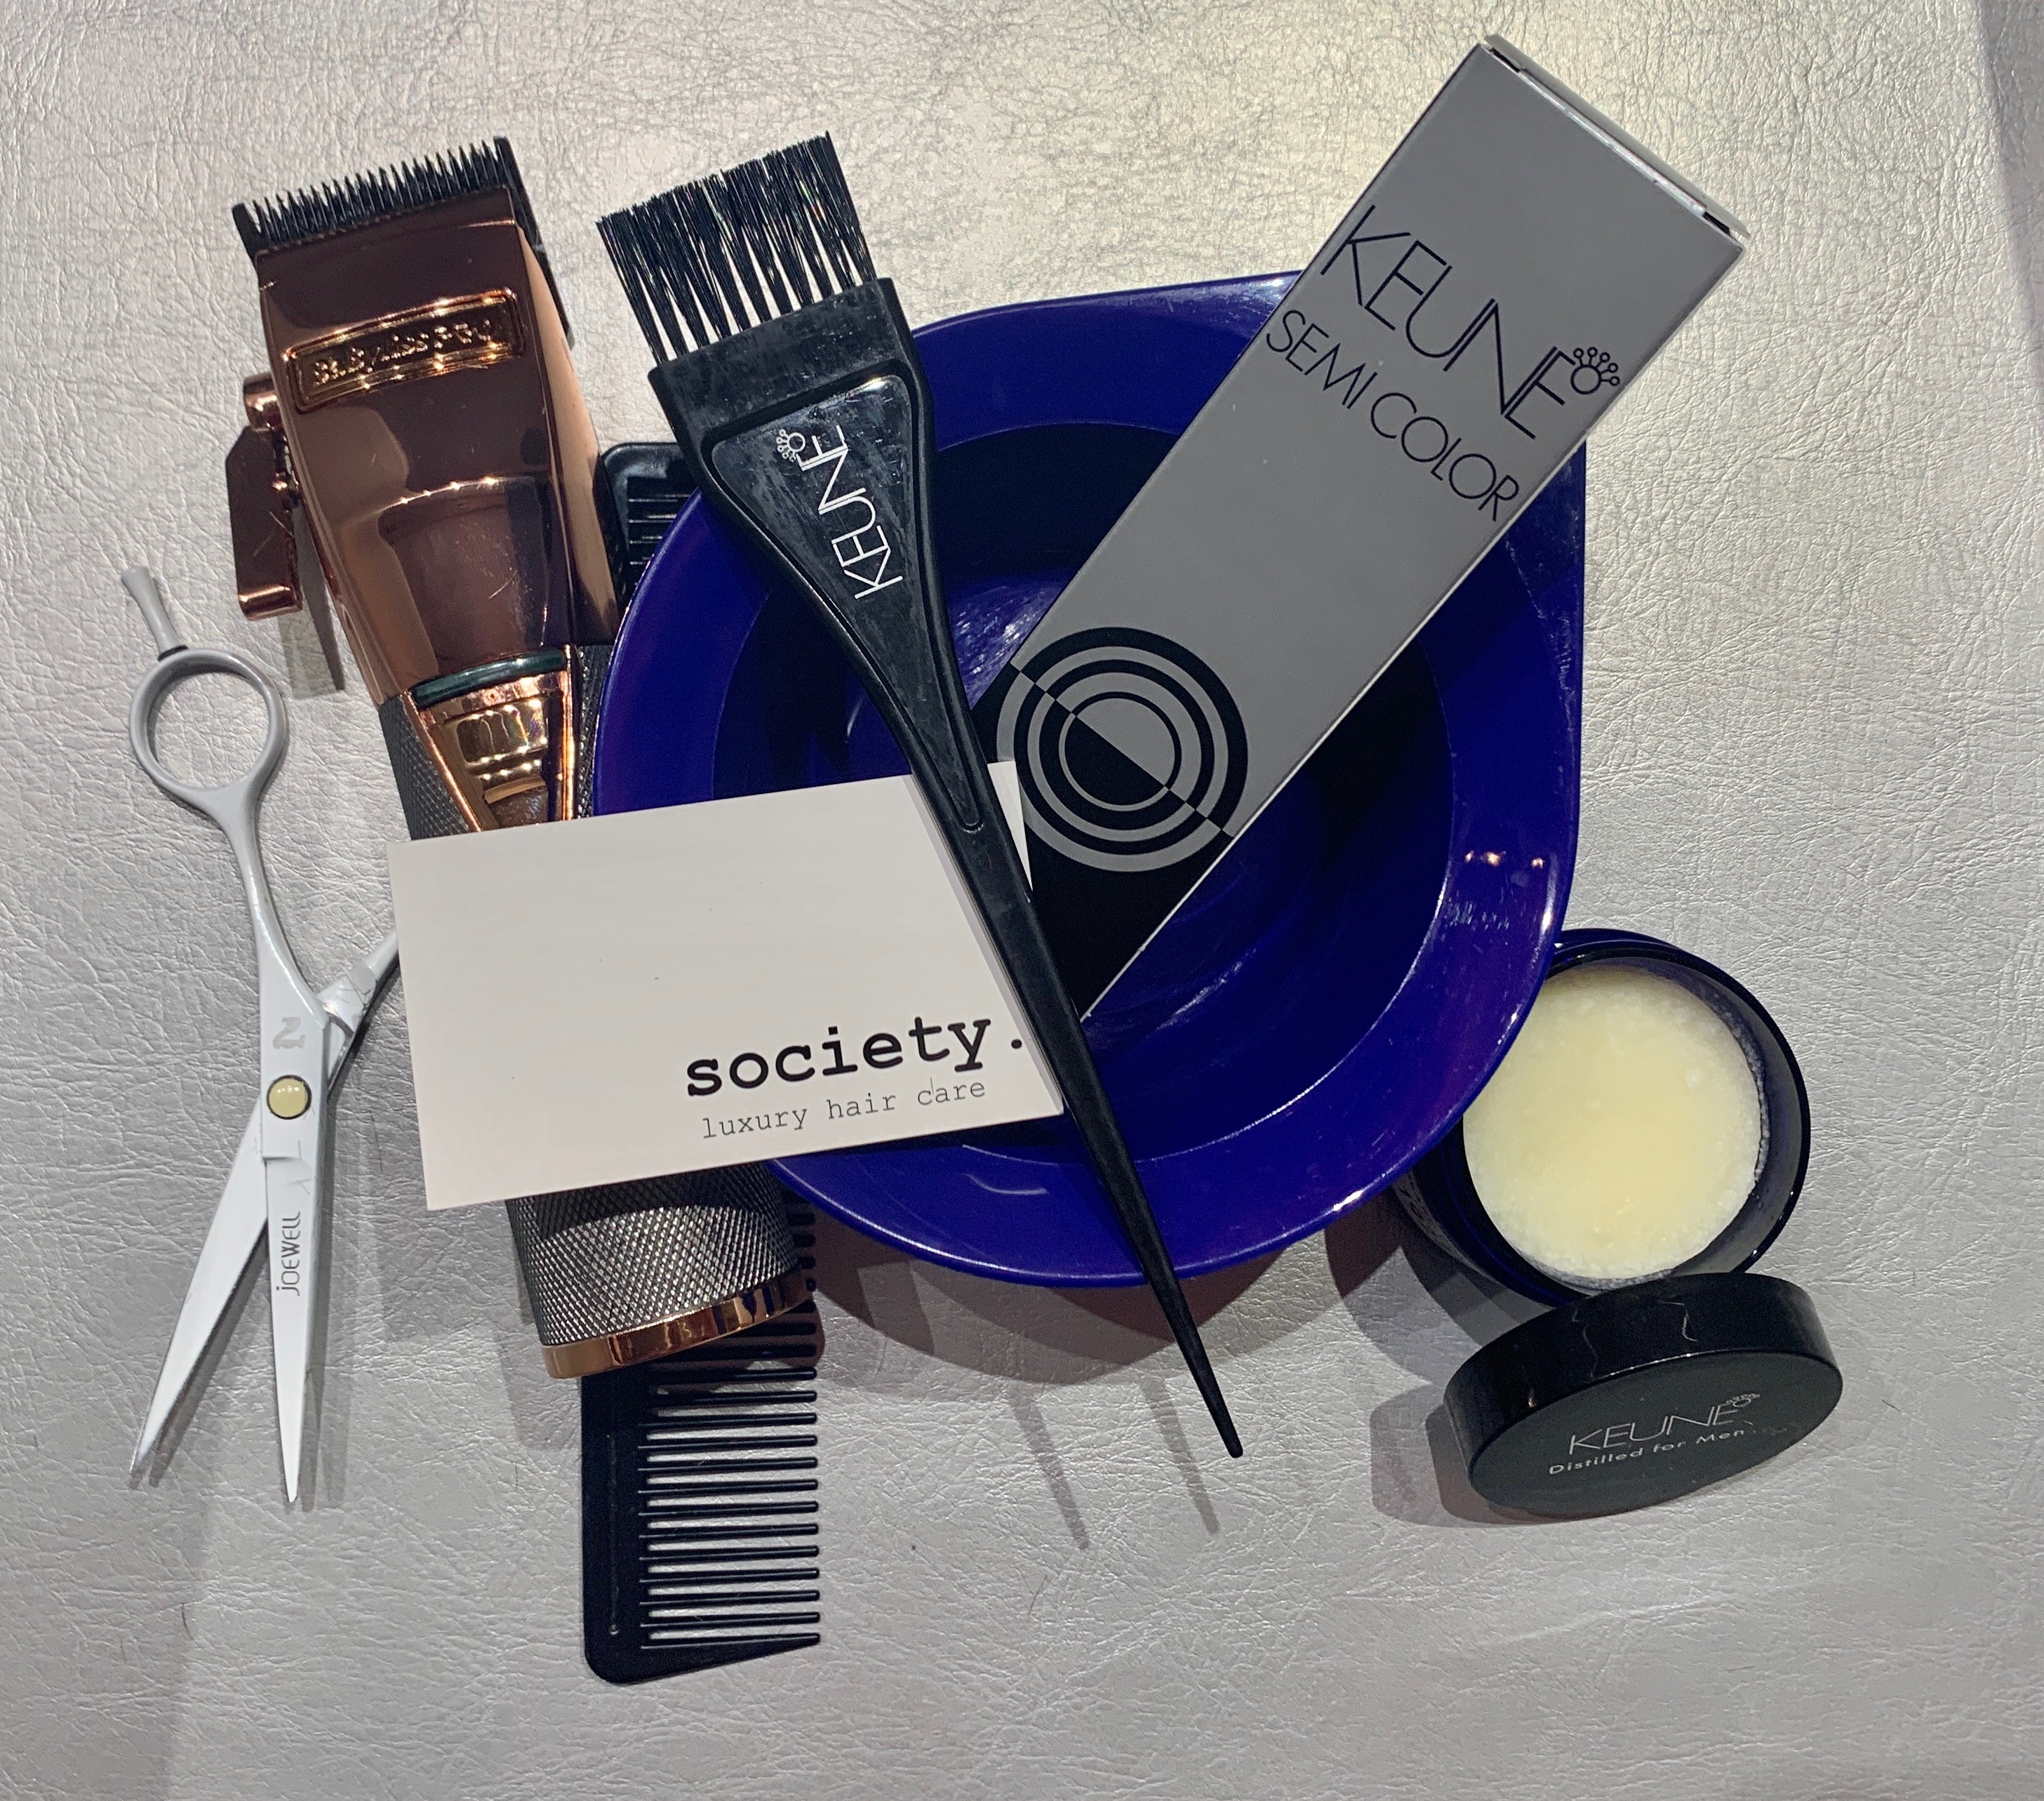 Society Luxury Hair Care Product Giveaways Half Priced